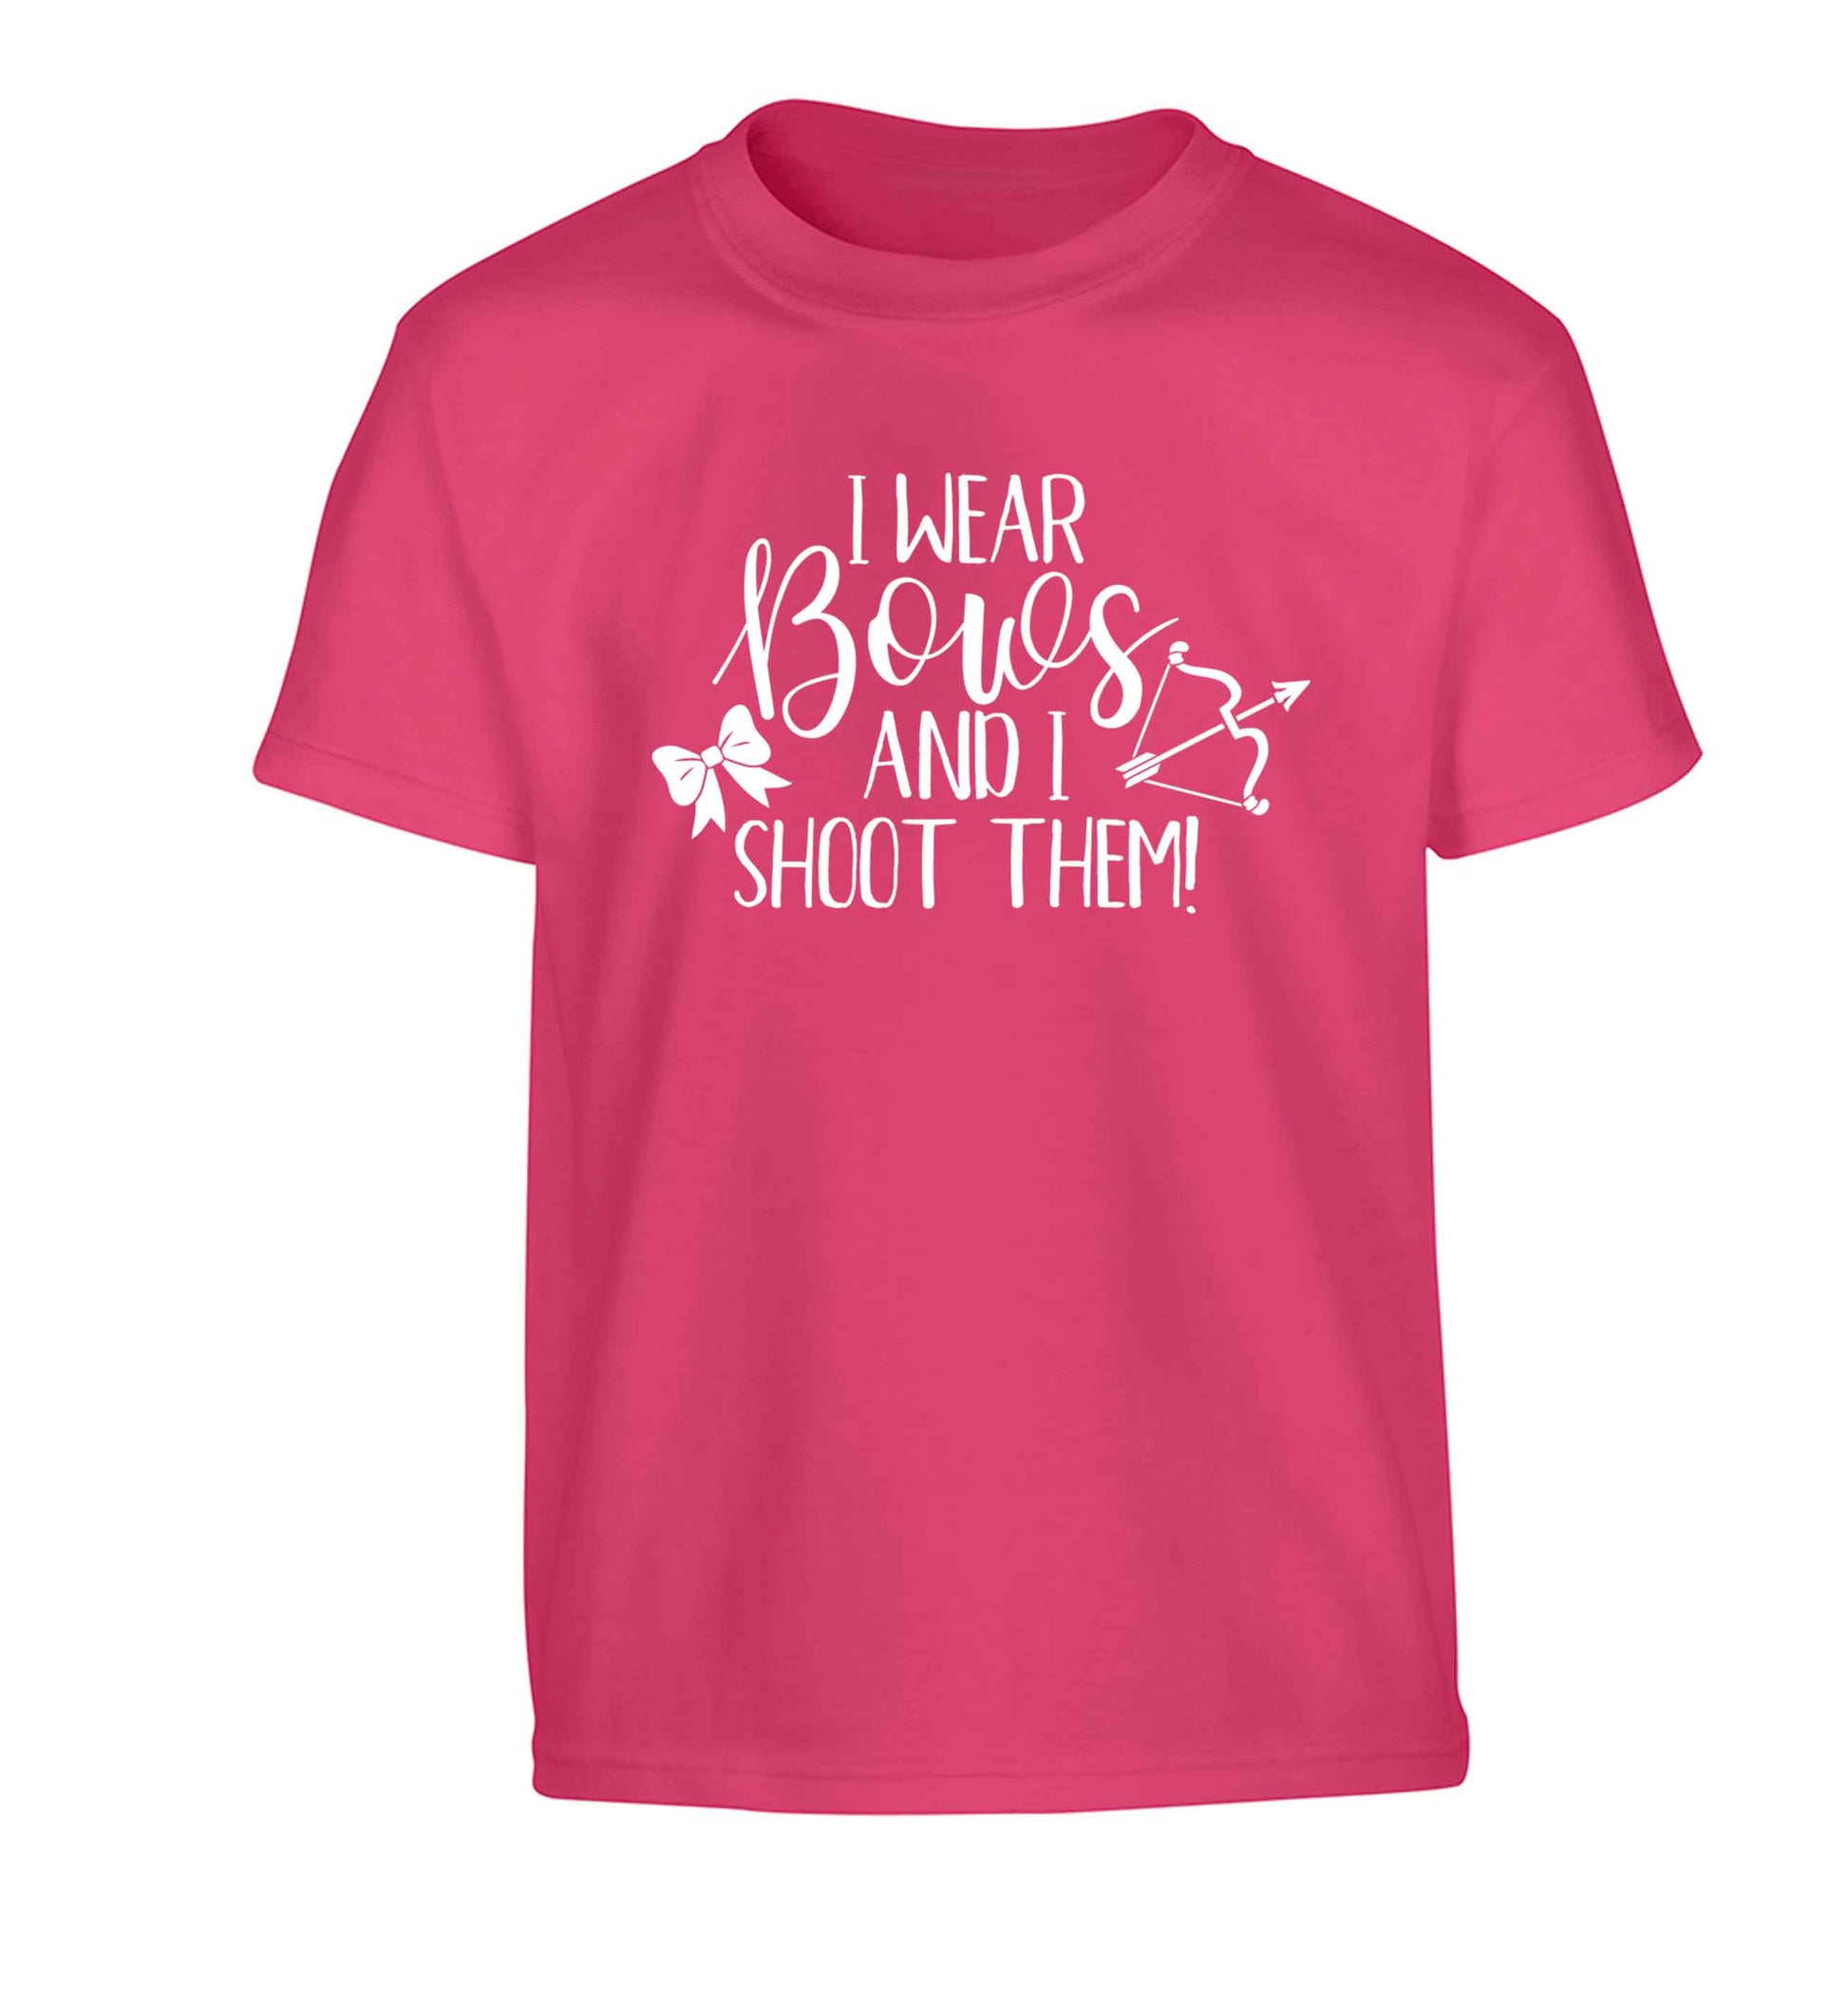 I wear bows and I shoot them Children's pink Tshirt 12-13 Years